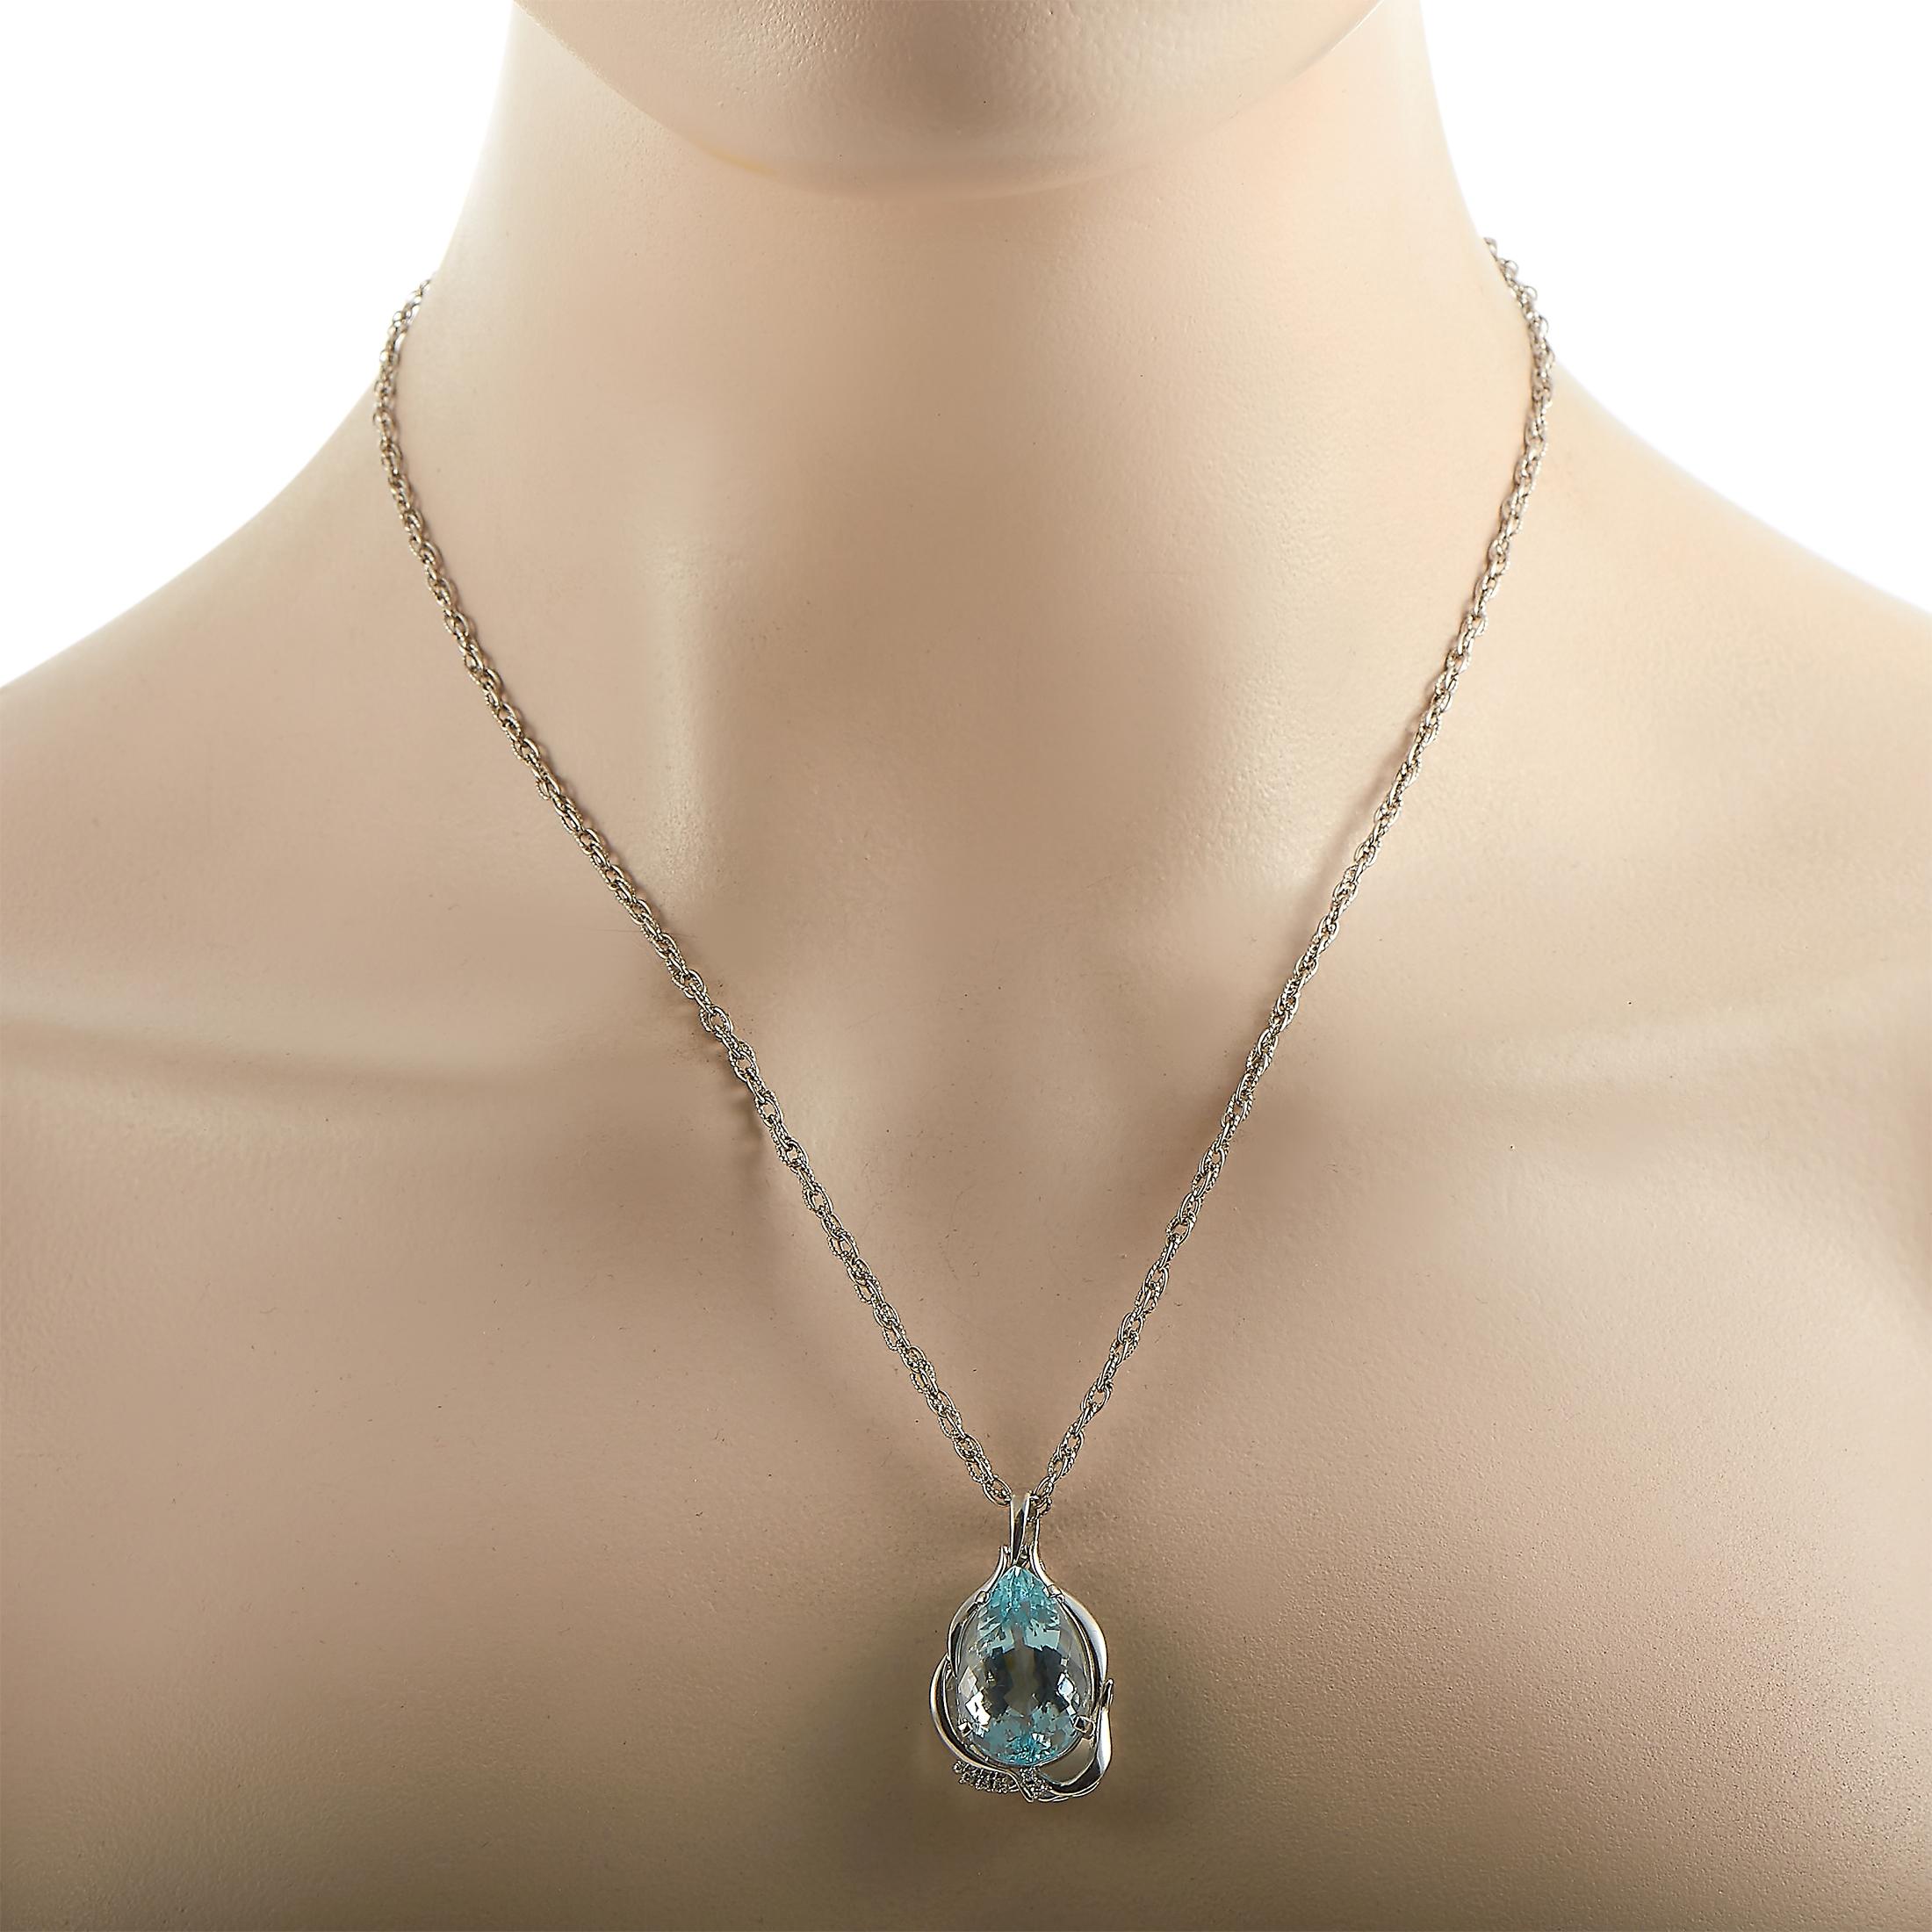 This LB Exclusive necklace is made of platinum and embellished with a 14.85 ct aquamarine and a total of 0.05 carats of diamonds. The necklace weighs 17.7 grams and boasts a 19” chain and a pendant that measures 1.25” in length and 0.75” in width.
